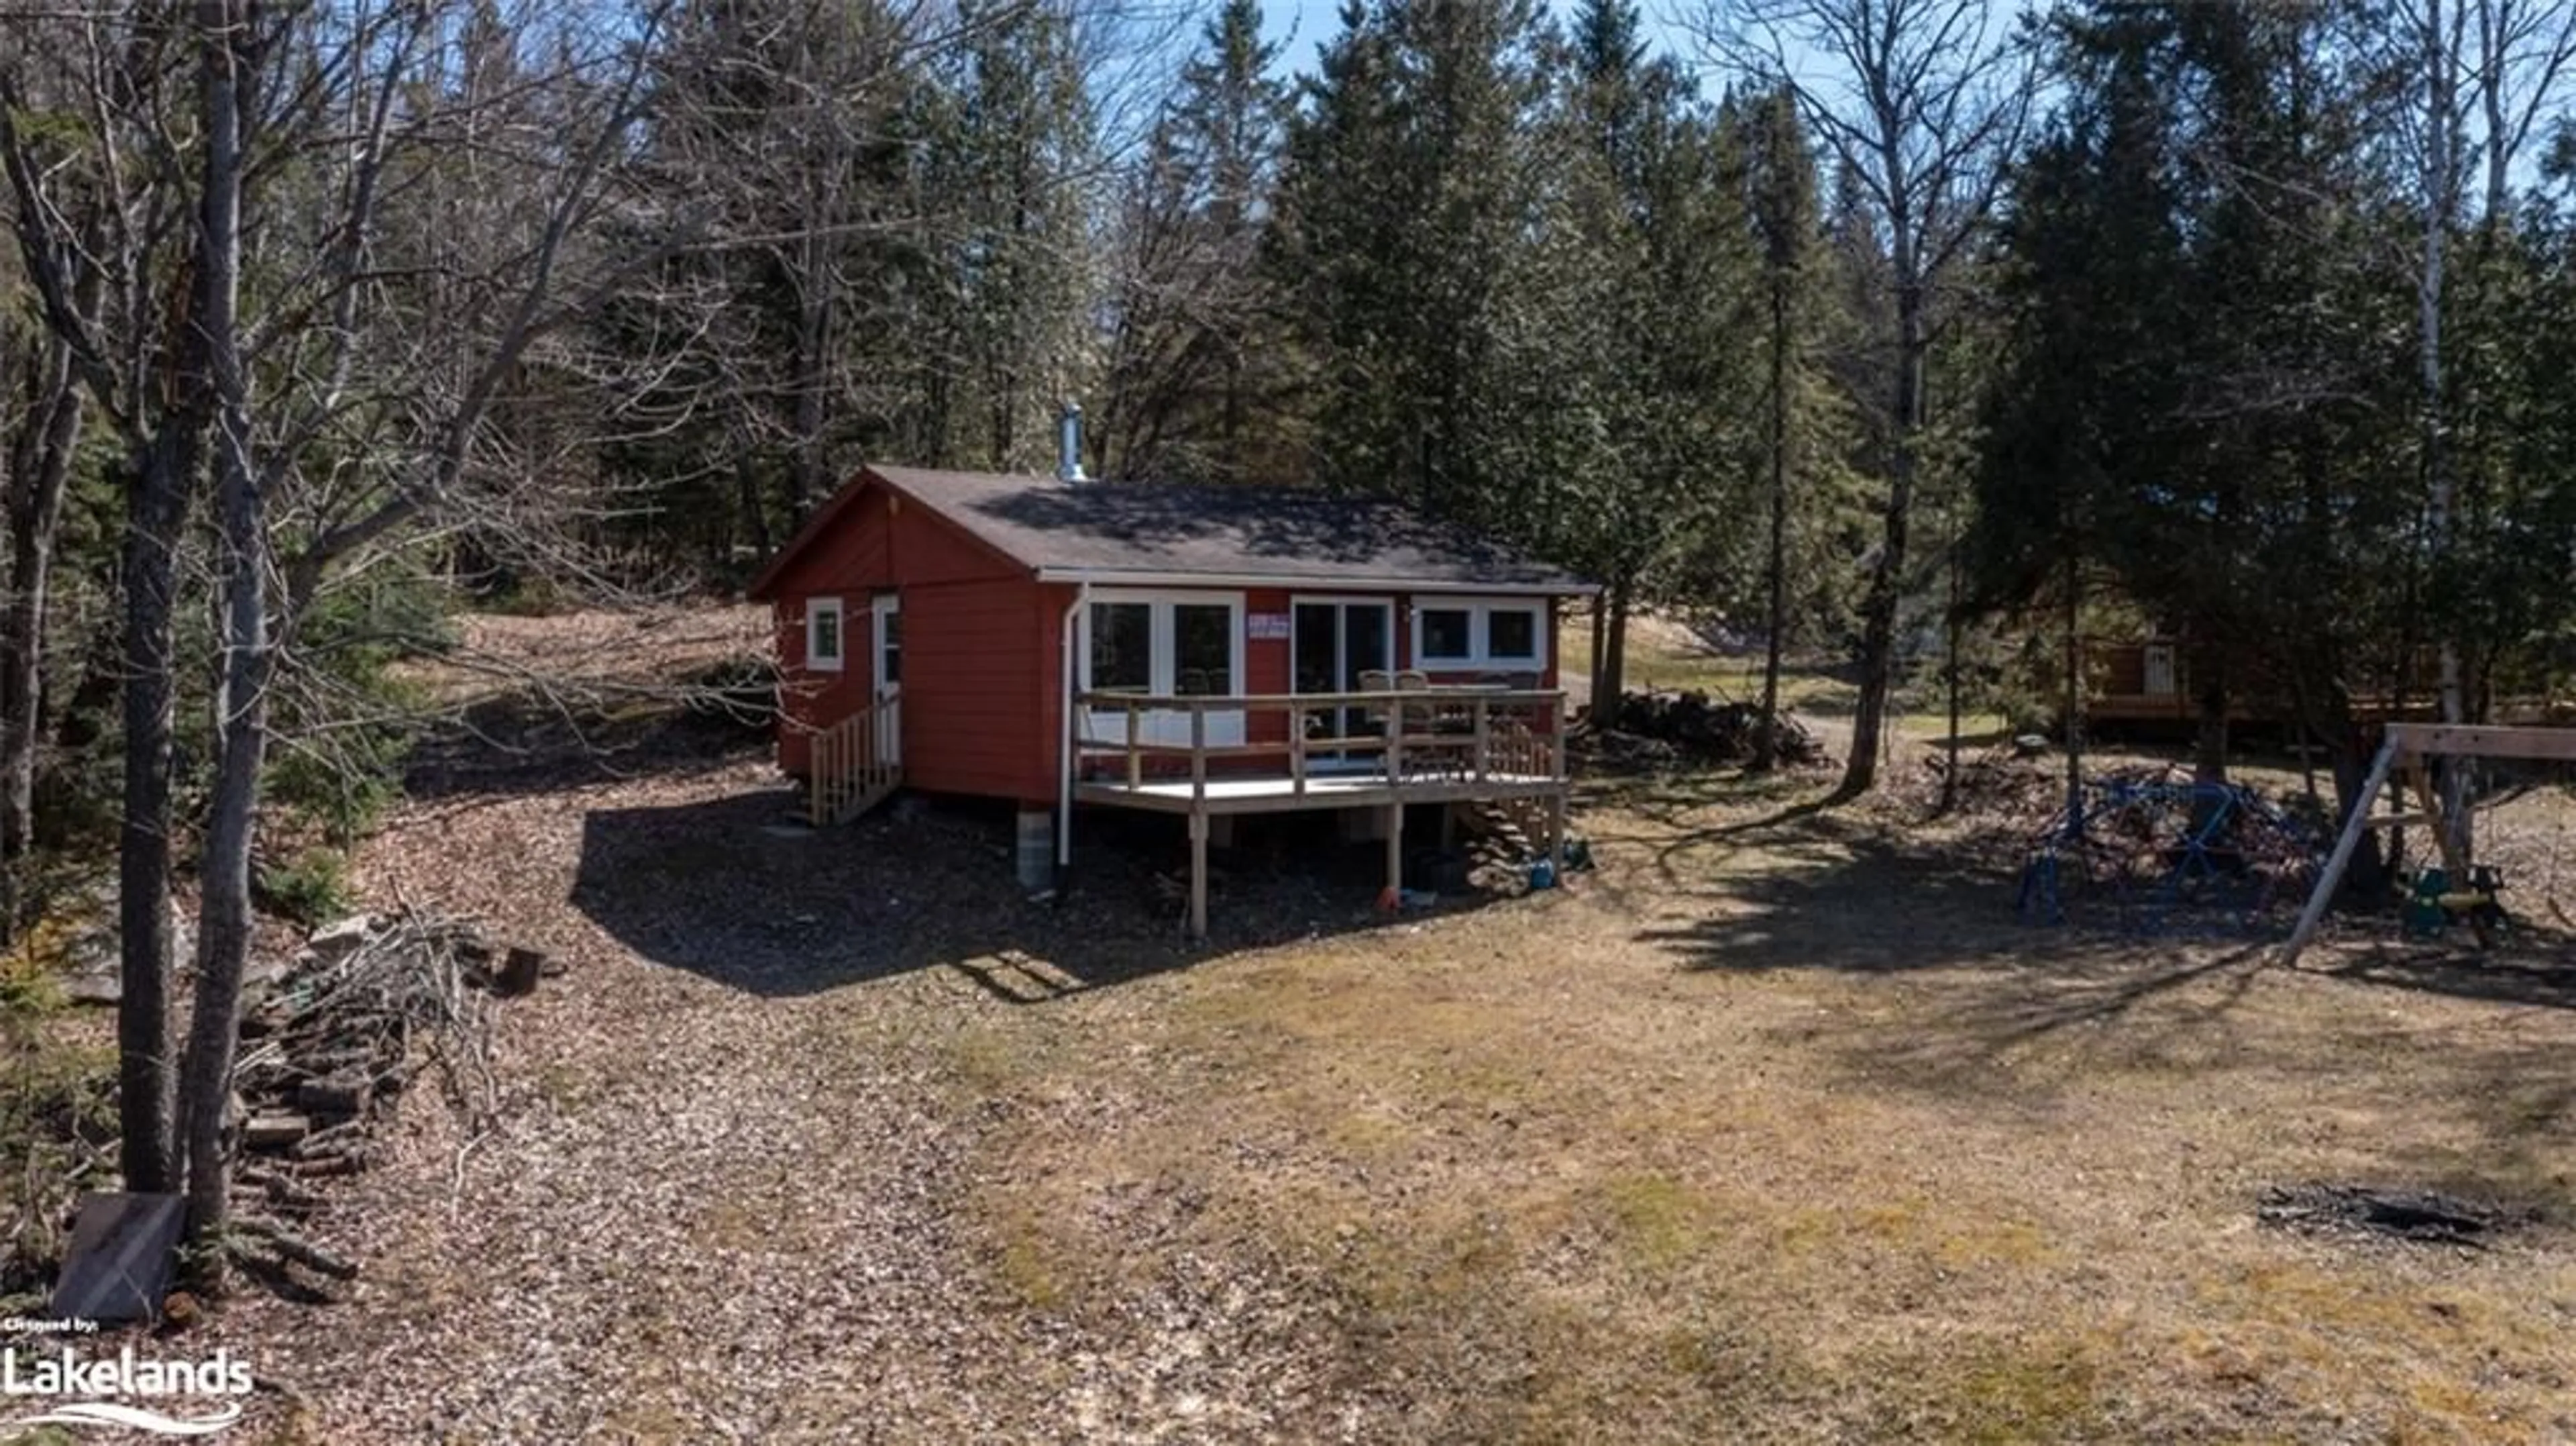 Cottage for 270 Whalley Lake Rd, Magnetawan Ontario P0A 1P0